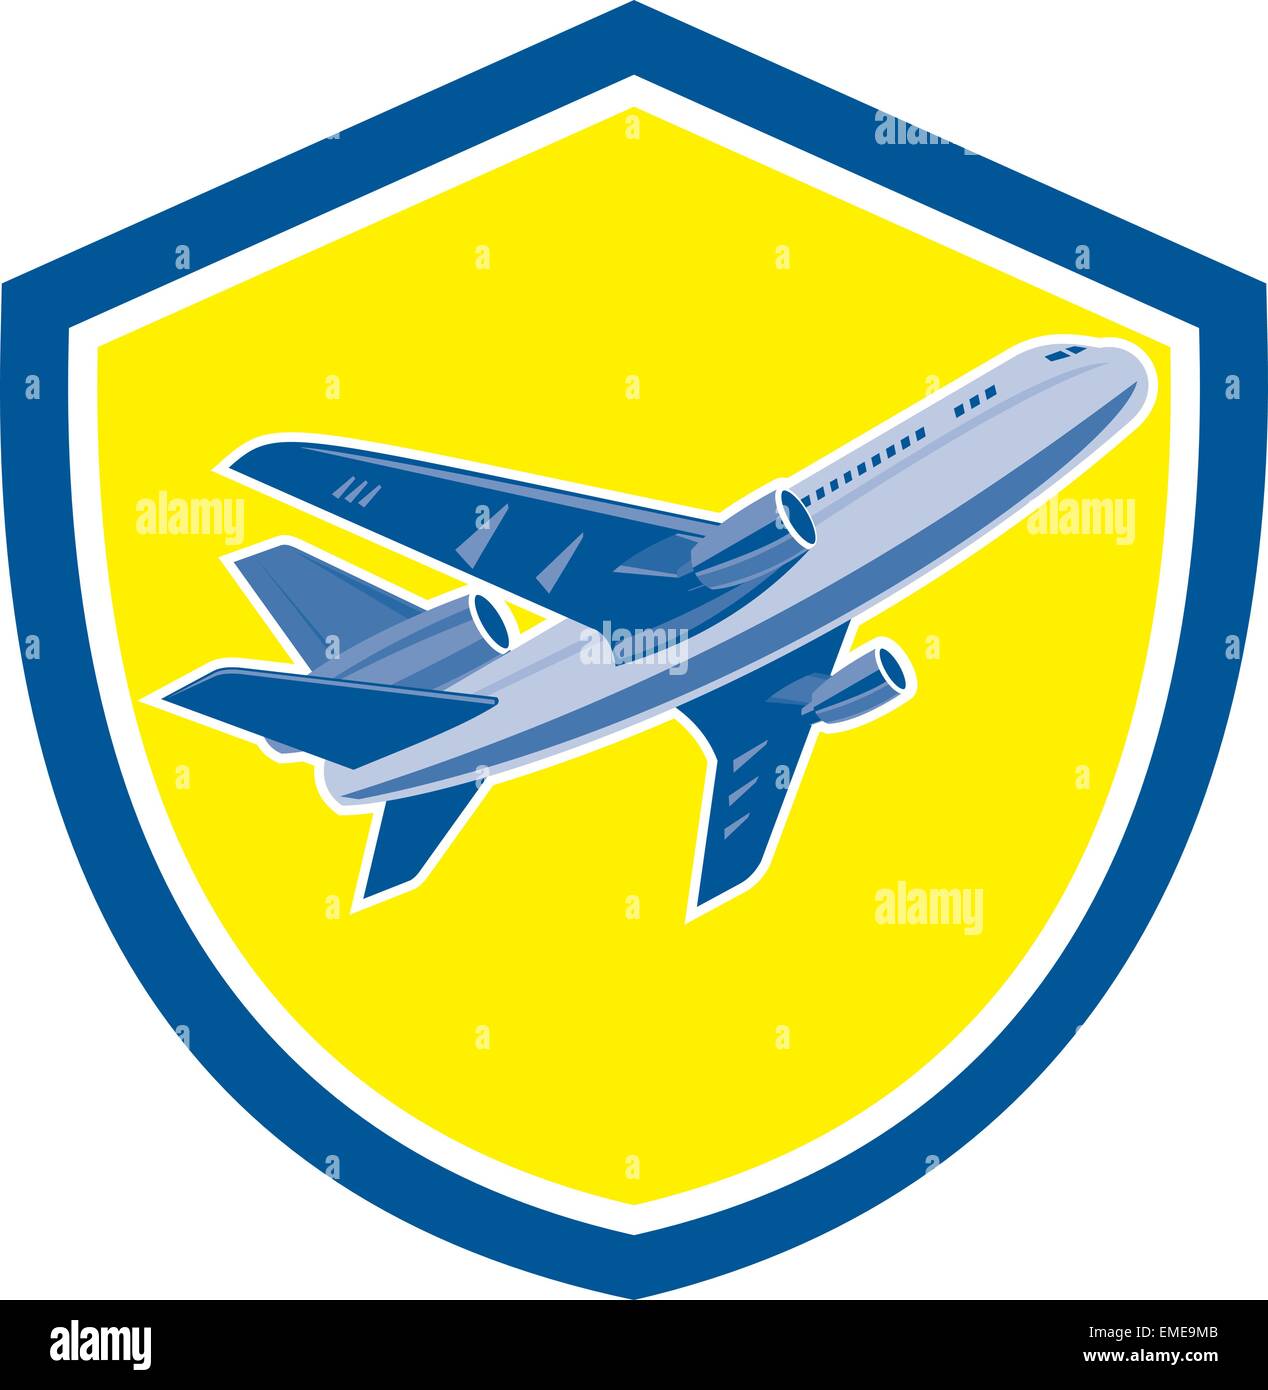 Commercial Airplane Jet Plane Airline Retro Stock Vector